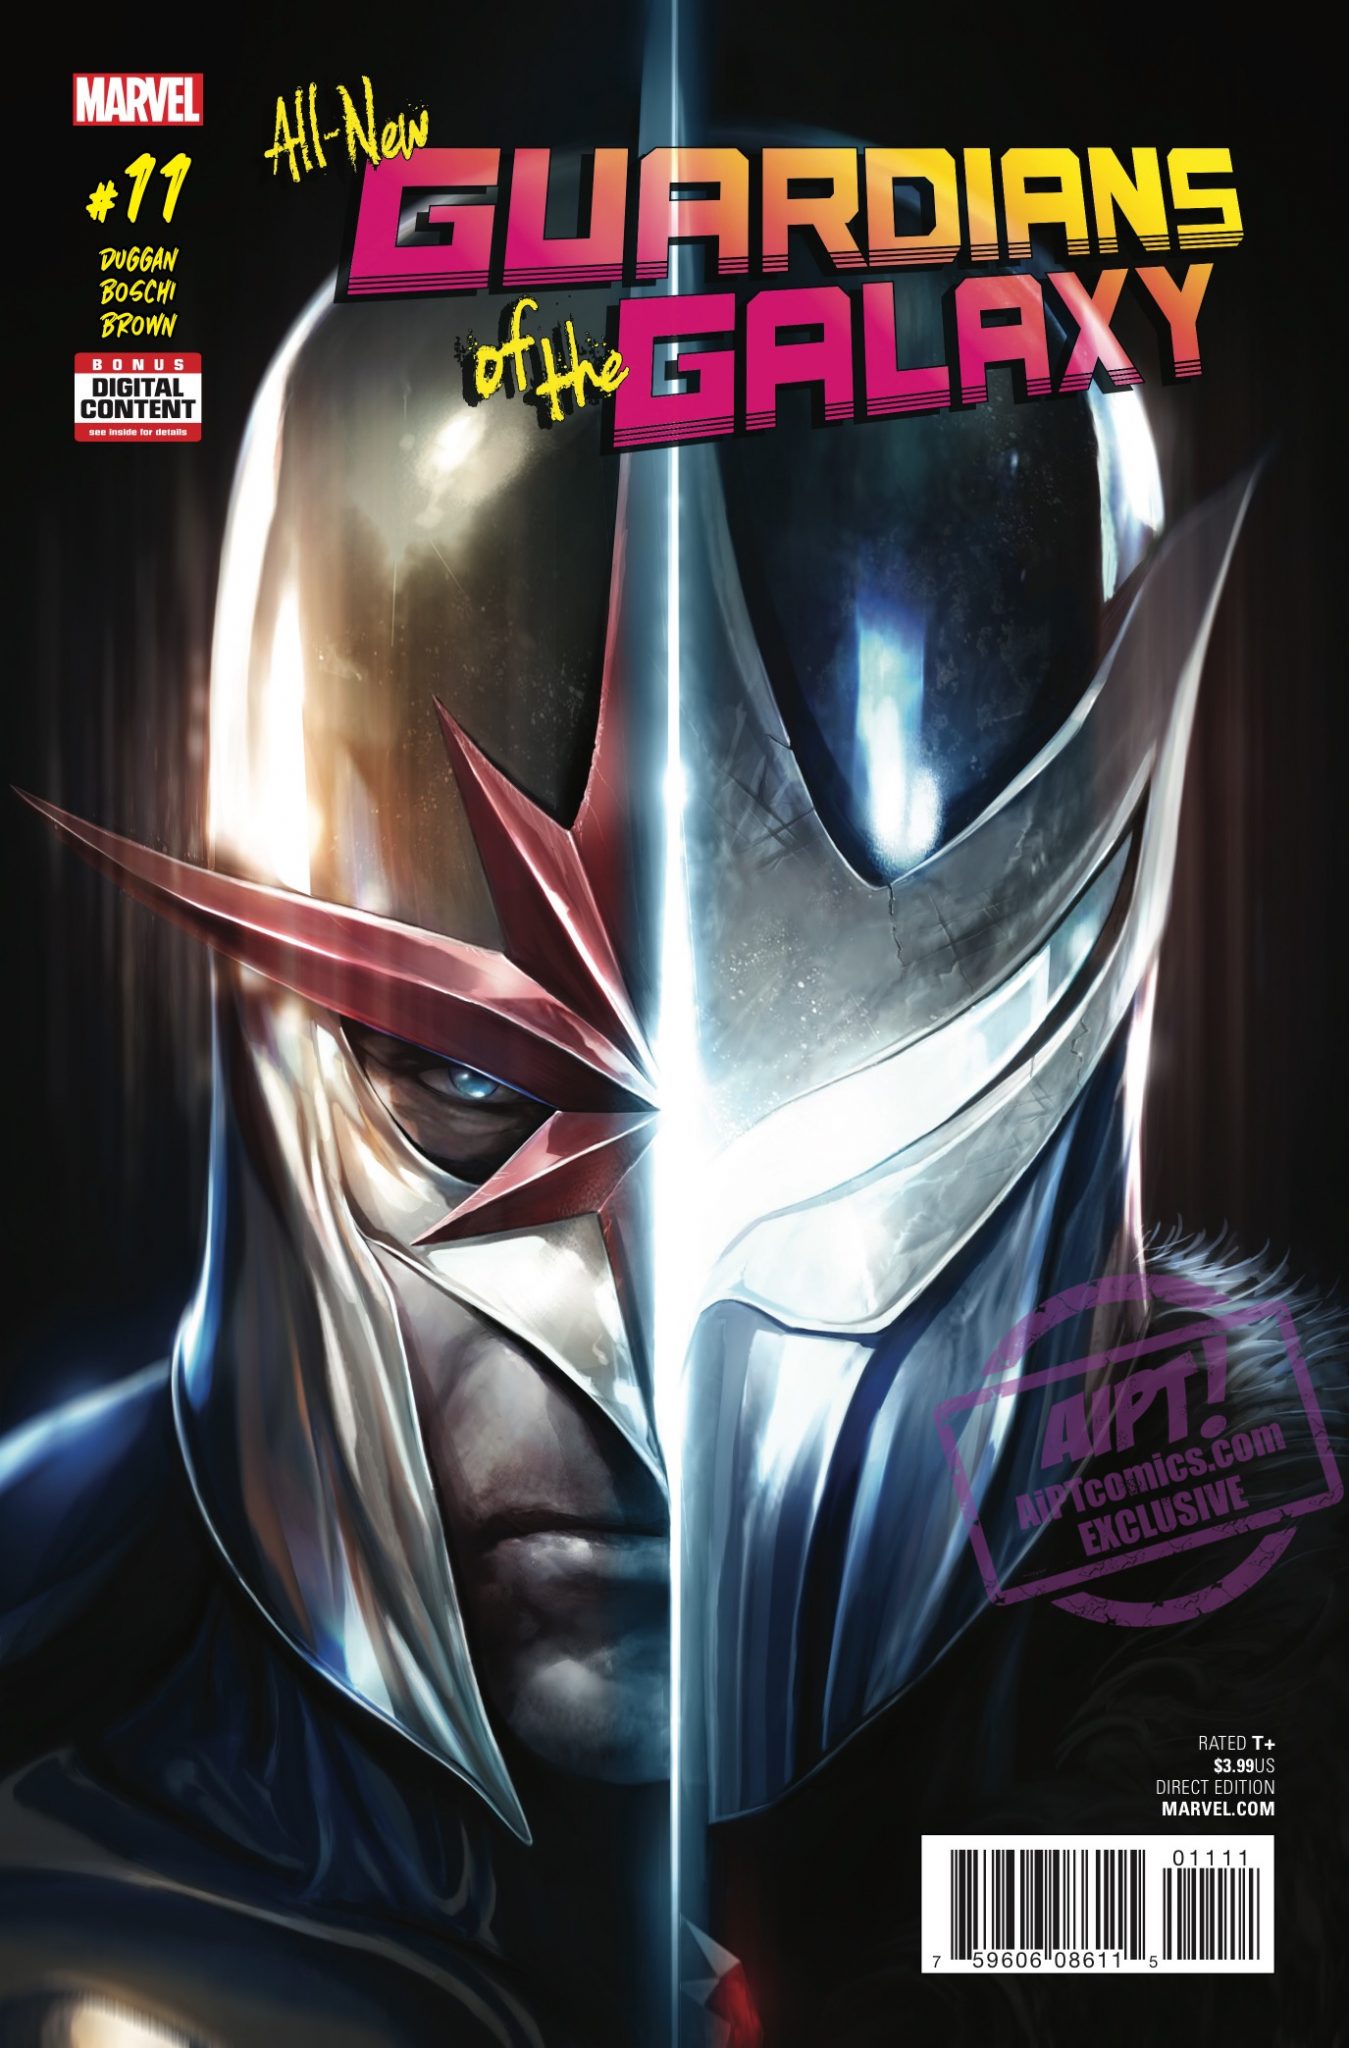 Marvel Preview: All-New Guardians Of The Galaxy #11